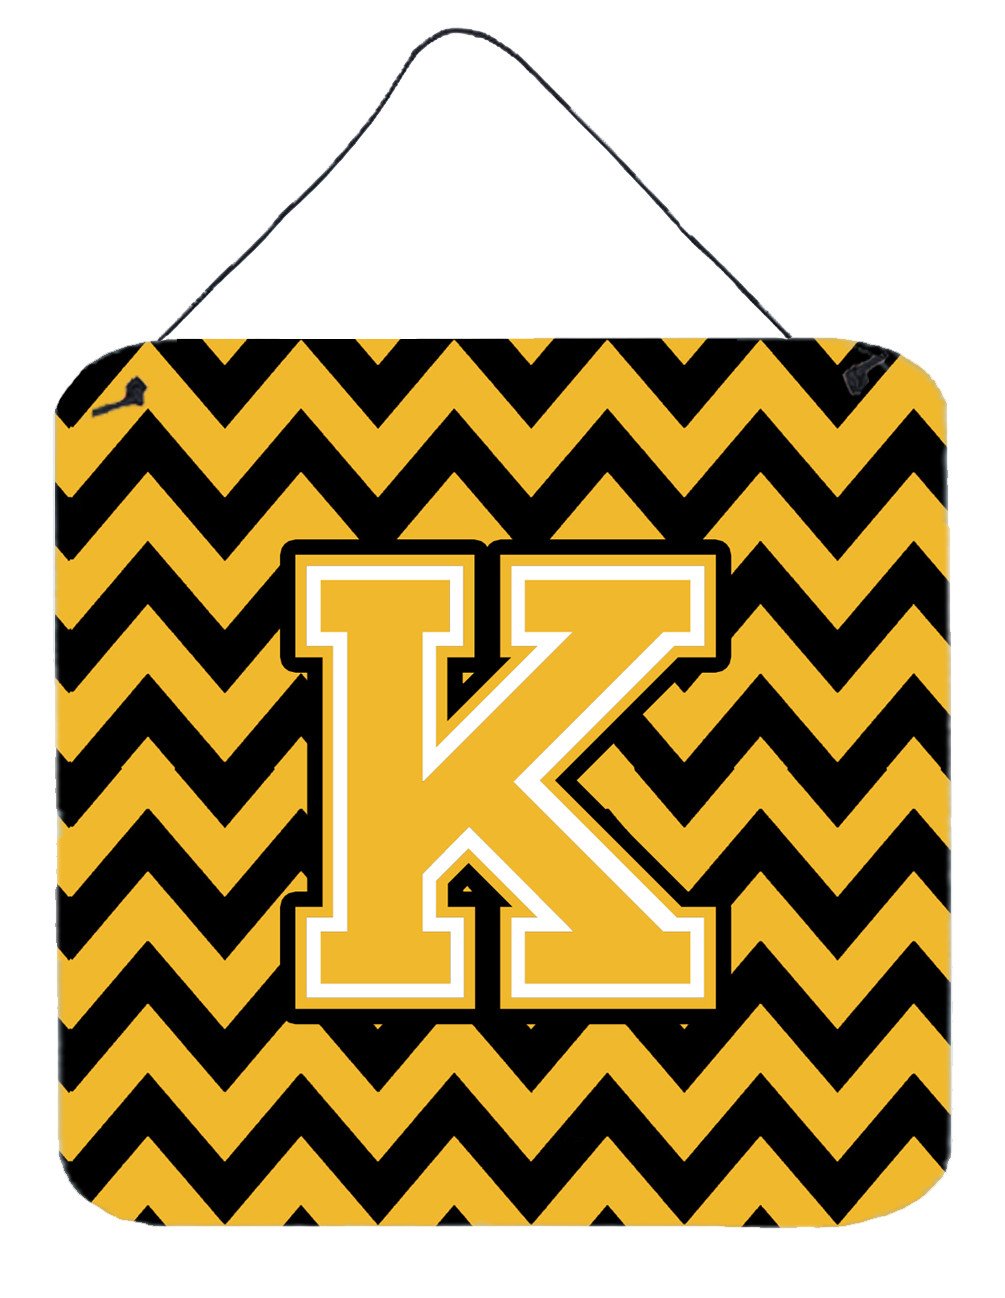 Letter K Chevron Black and Gold Wall or Door Hanging Prints CJ1053-KDS66 by Caroline's Treasures